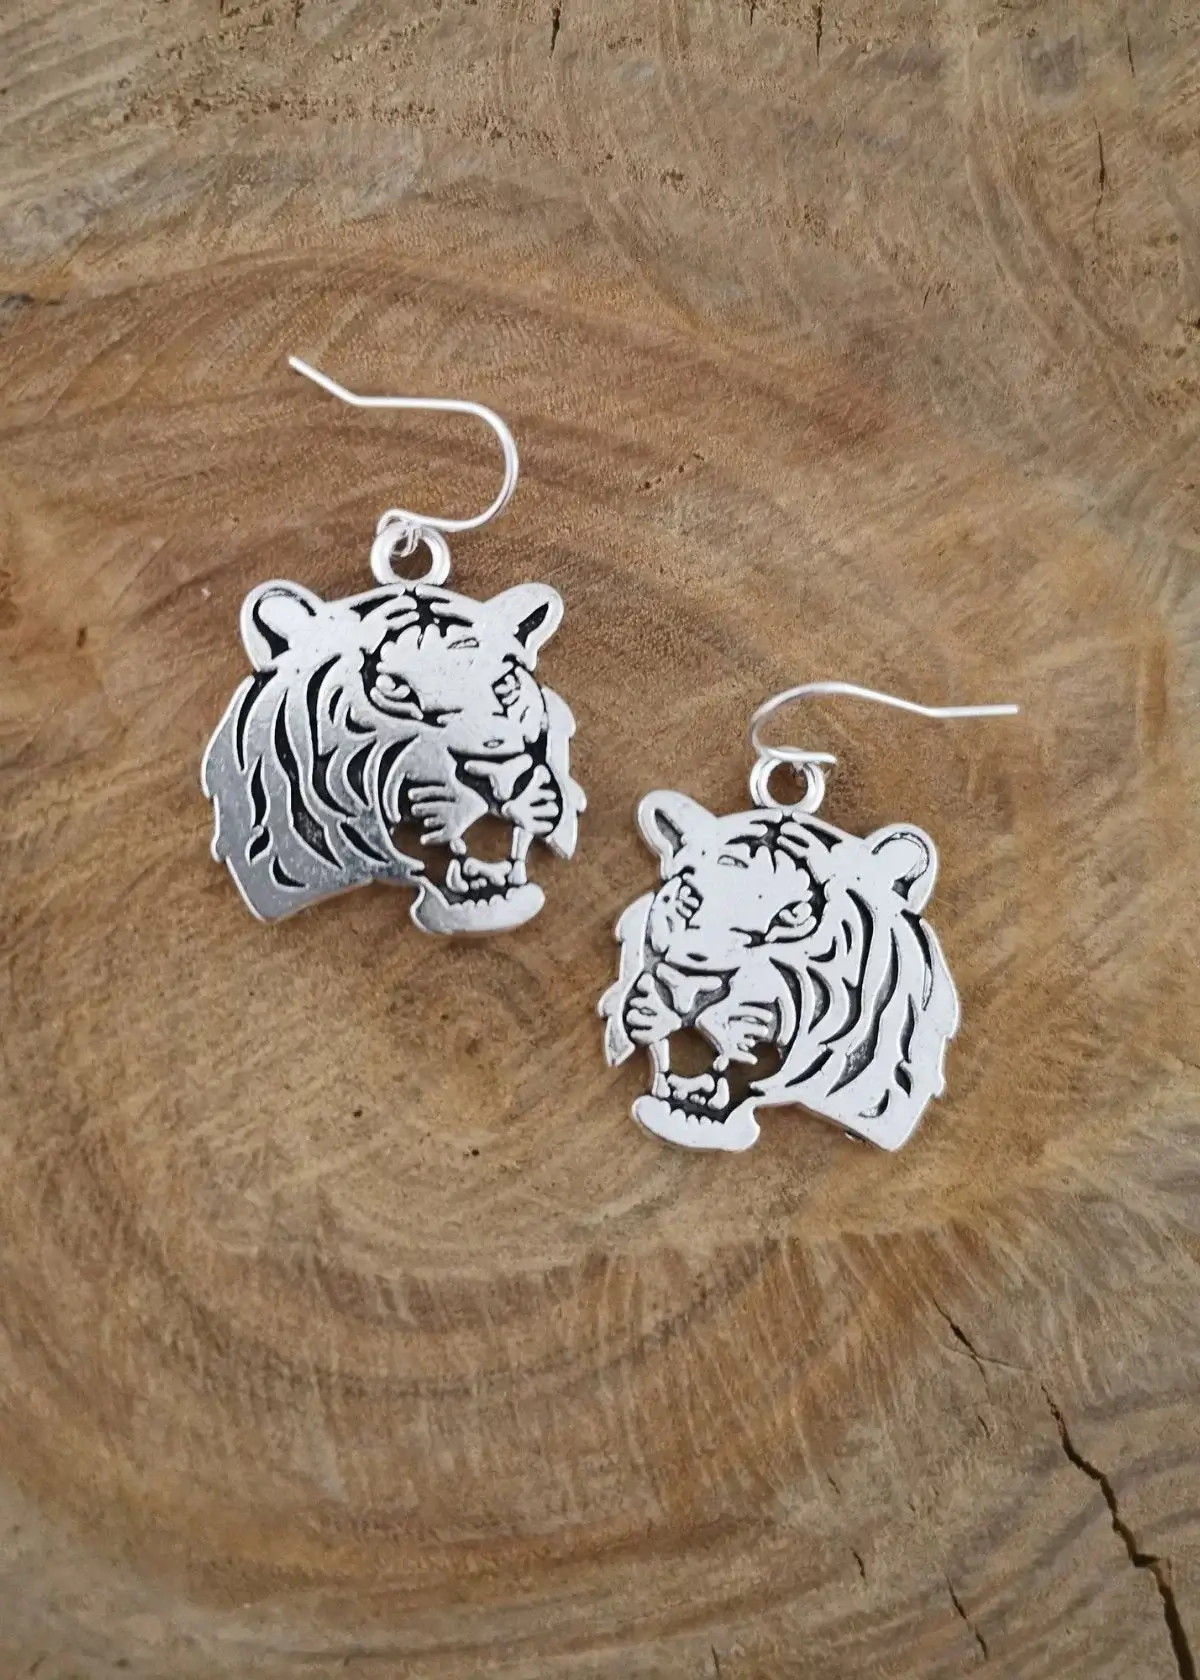 What types of Outfits Can I wear with Tiger Earrings?